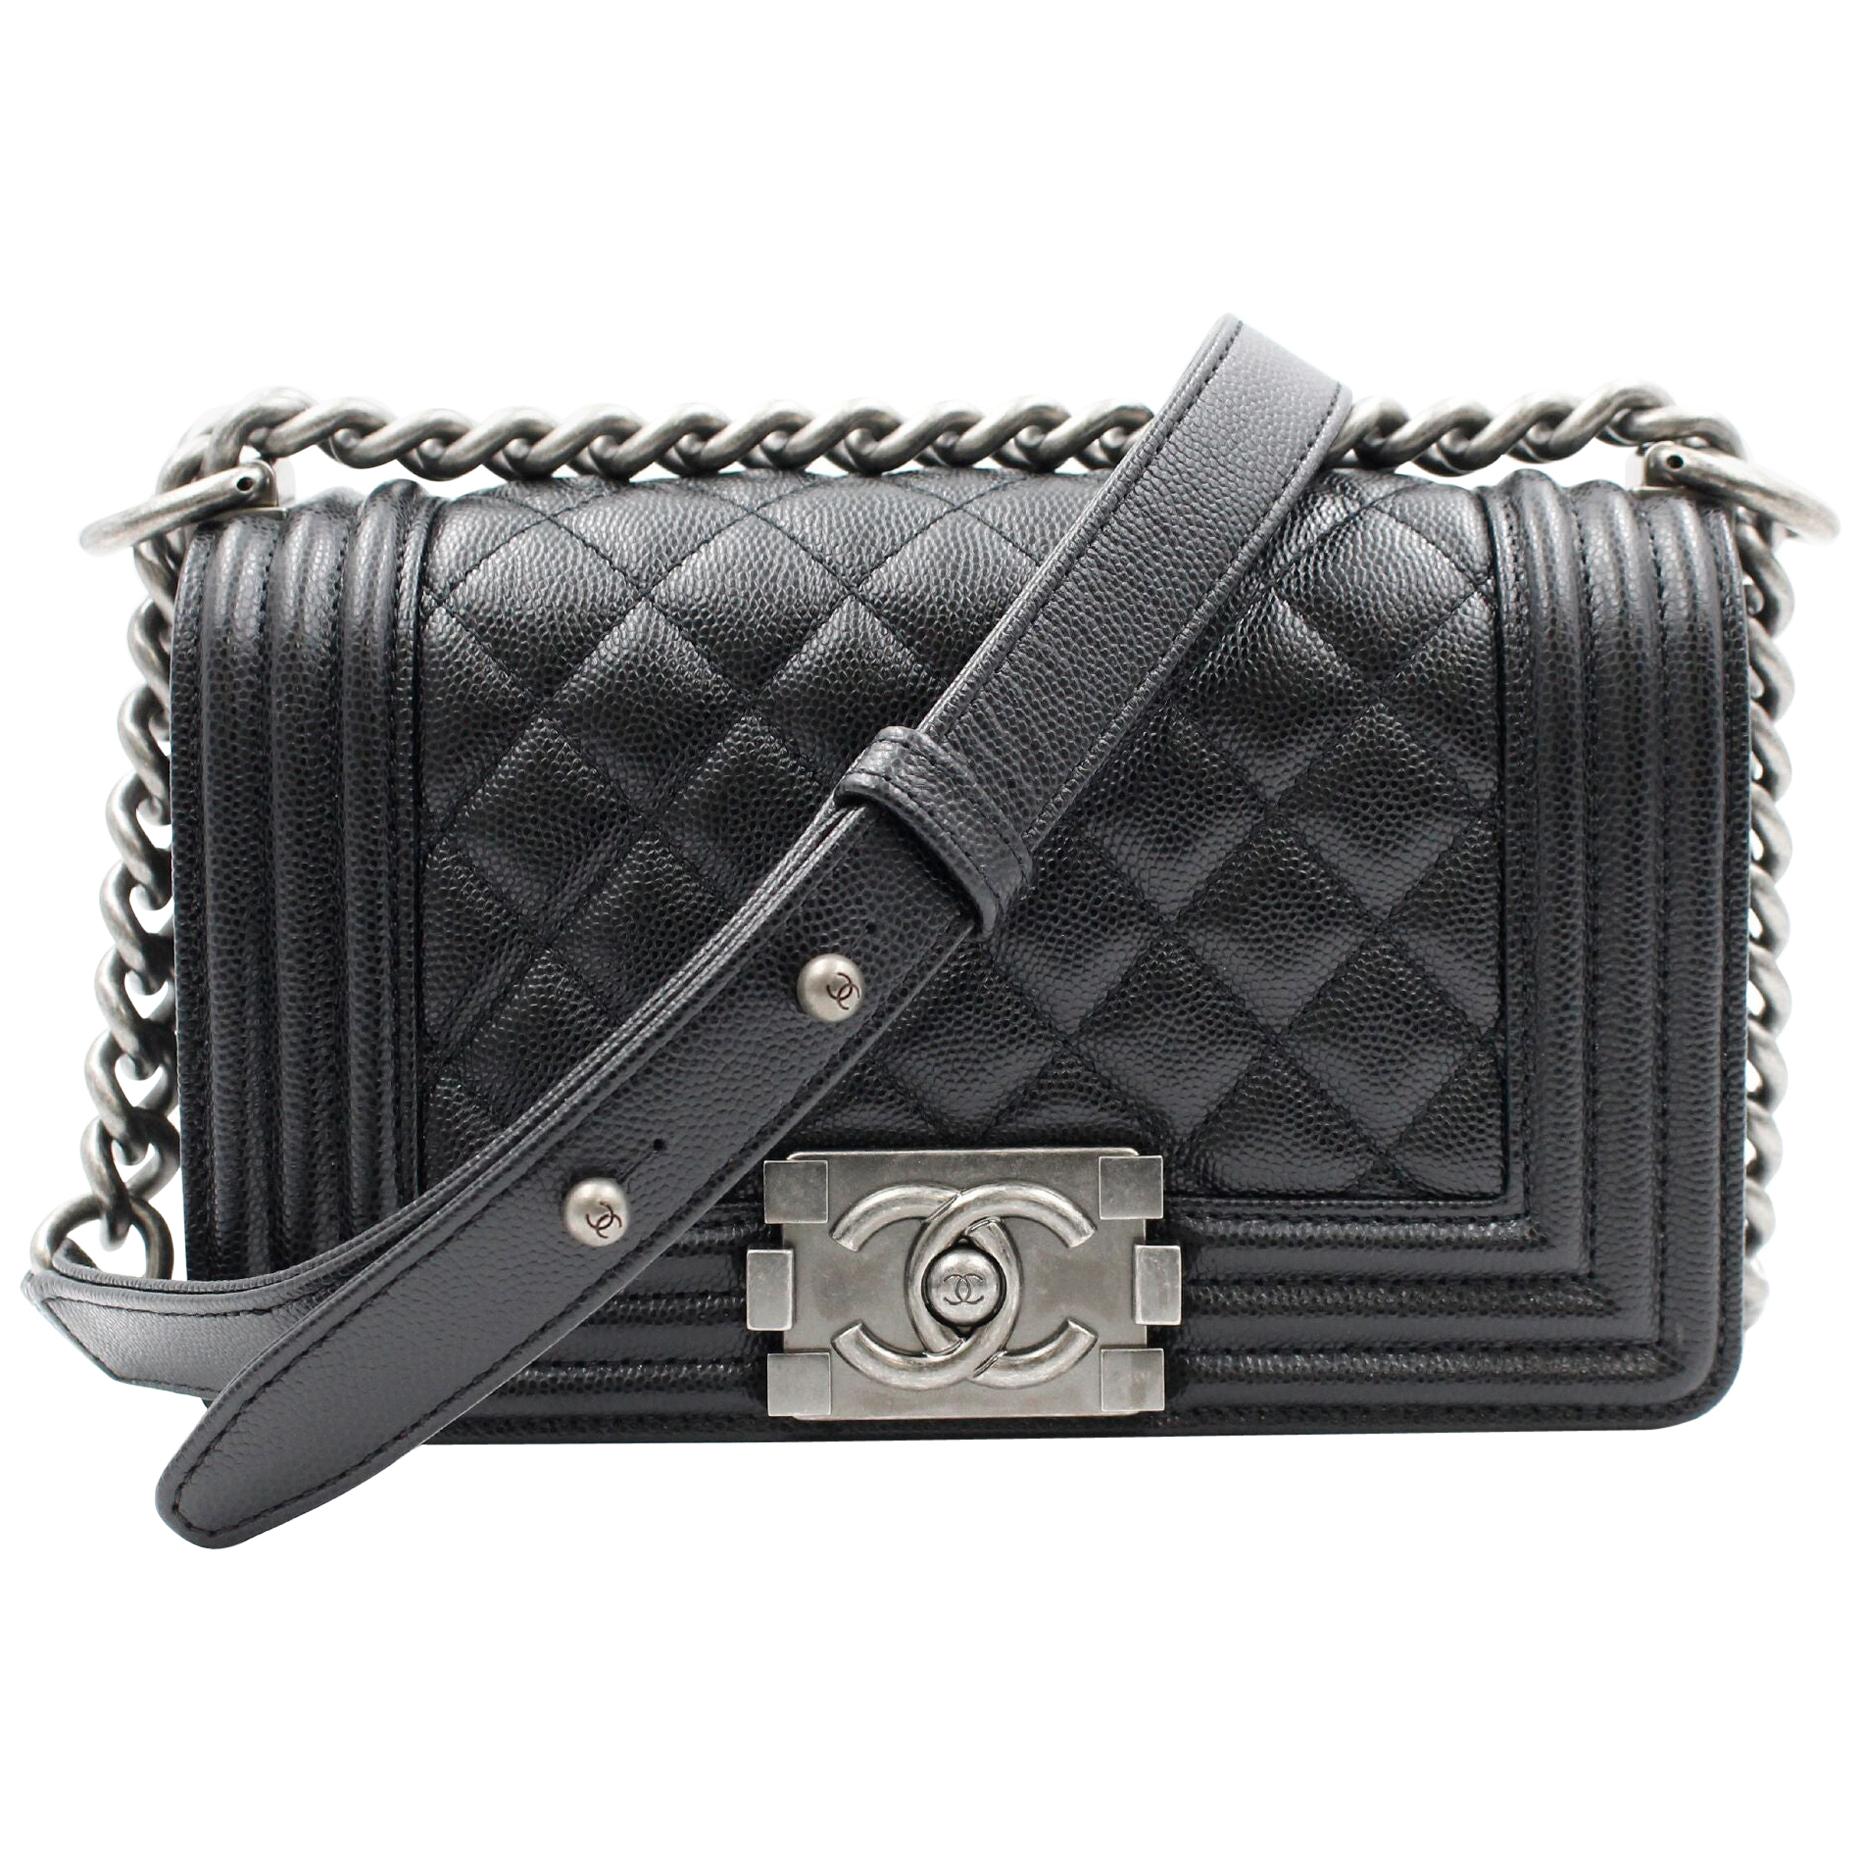 Chanel Black Caviar Leather and Ruthenium Finish Metal Small Boy